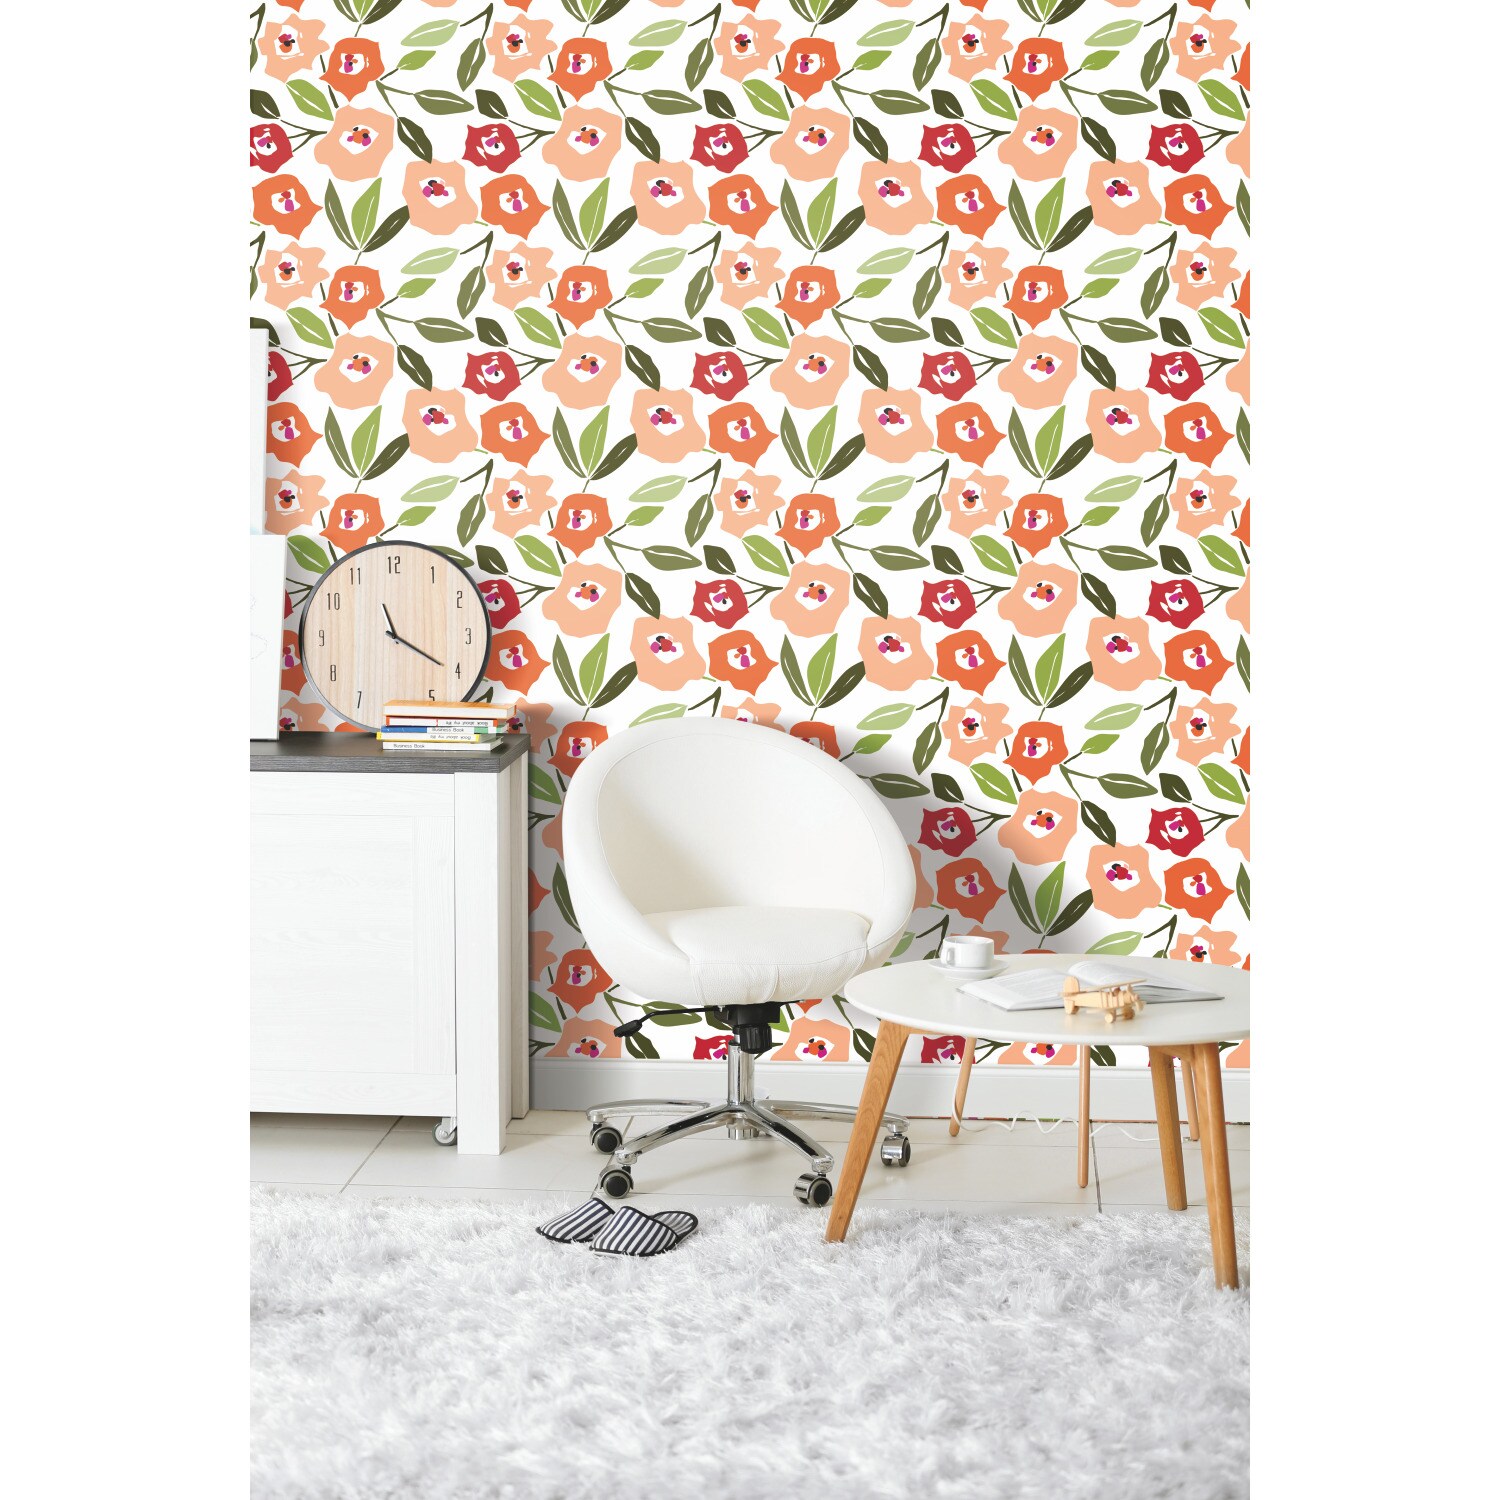 RoomMates 28.29-sq ft Pink Vinyl Floral Self-adhesive Peel and Stick ...